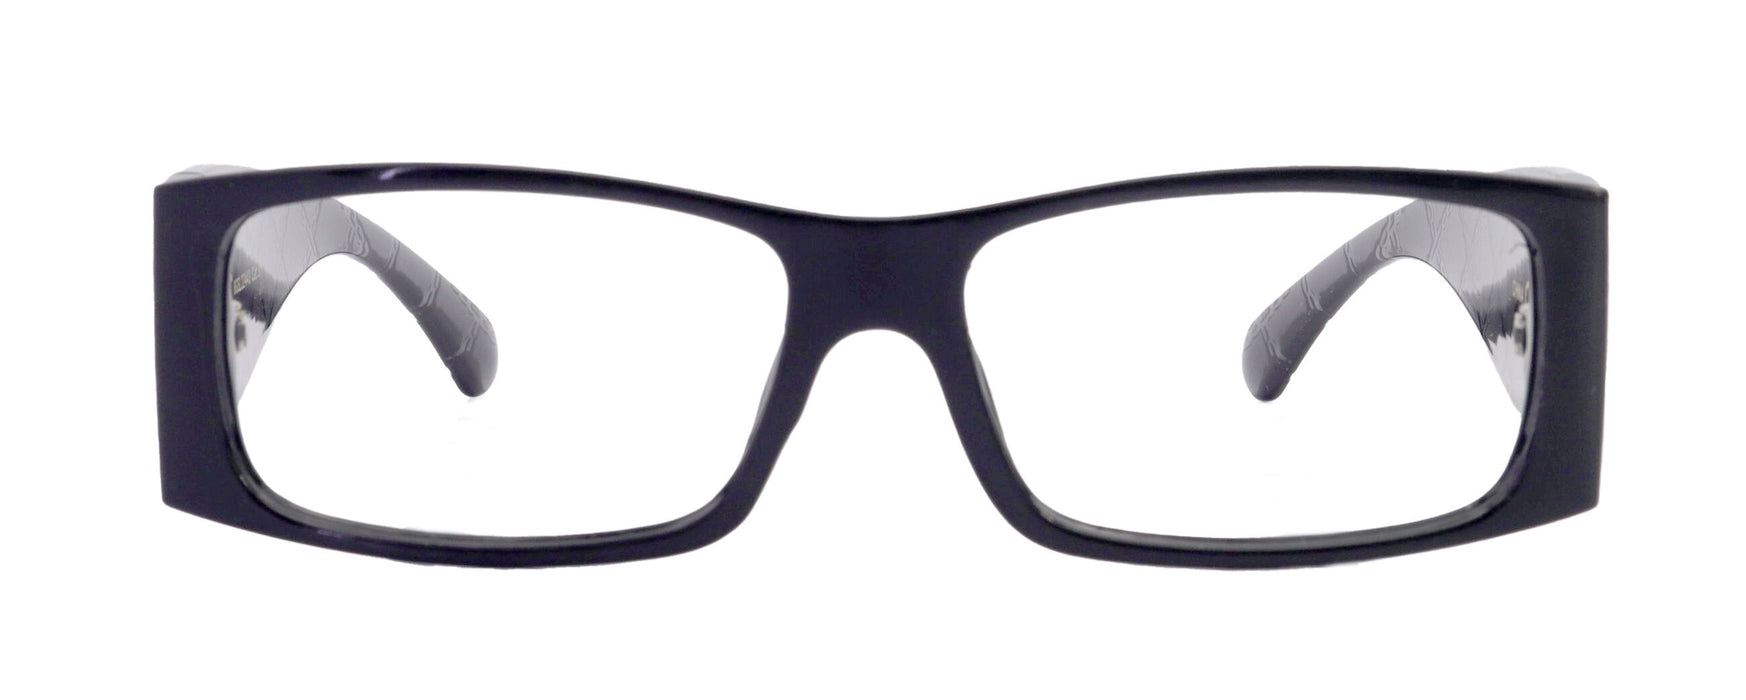 Reading Glasses, Black, Medium Frame, High End Readers, Bifocal, Sun readers, Trendy Style, NY Fifth Avenue